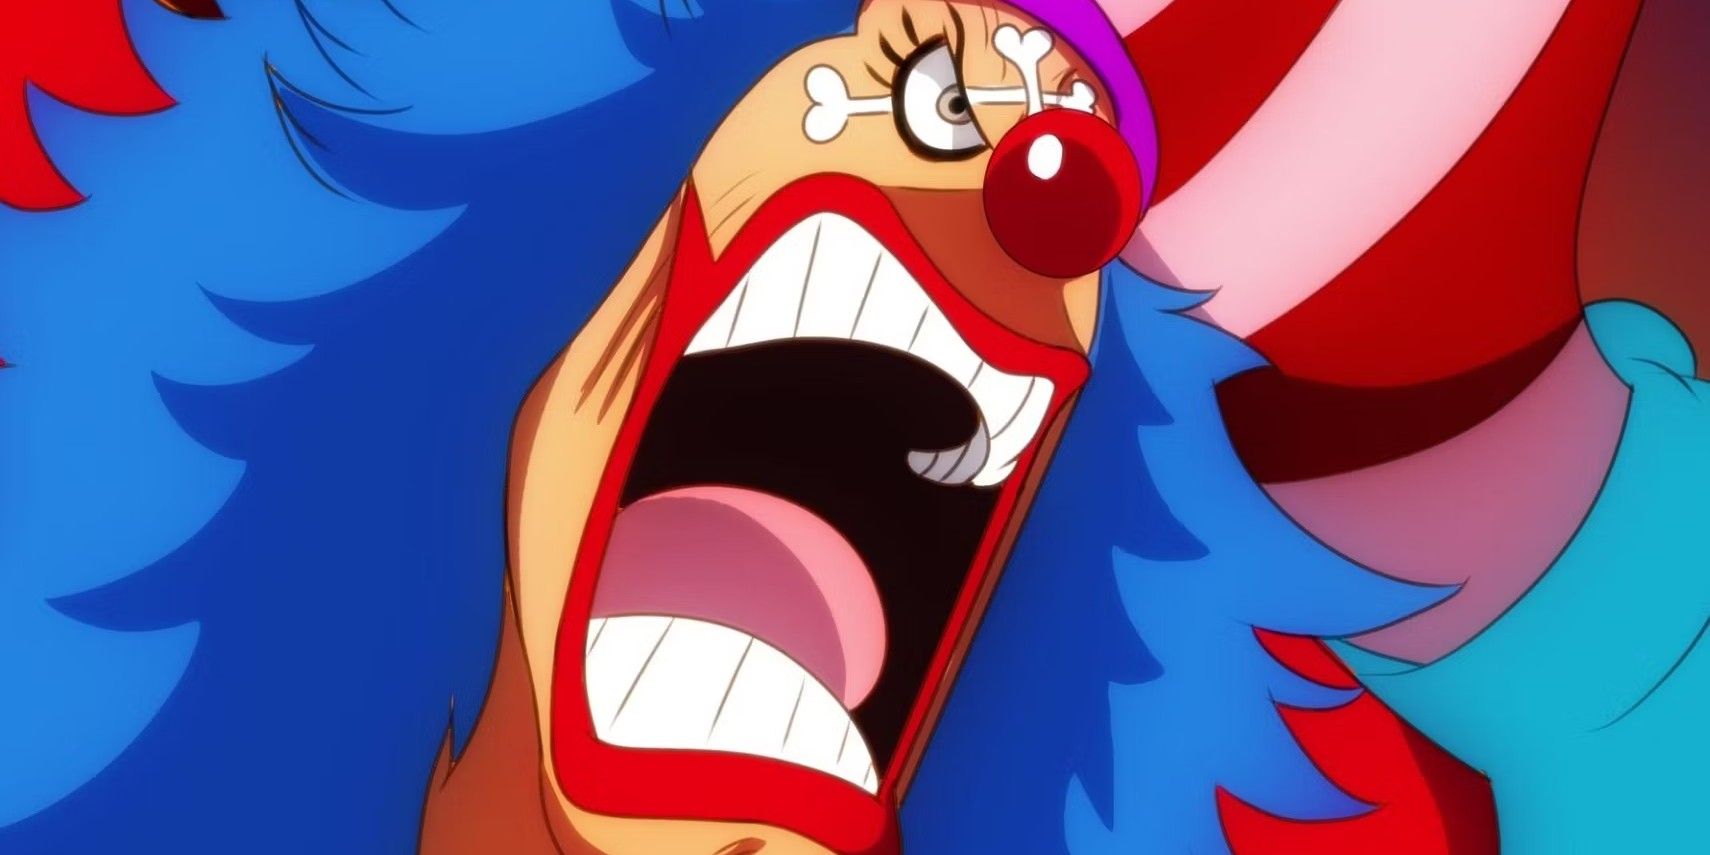 buggy the clown yelling in one piece